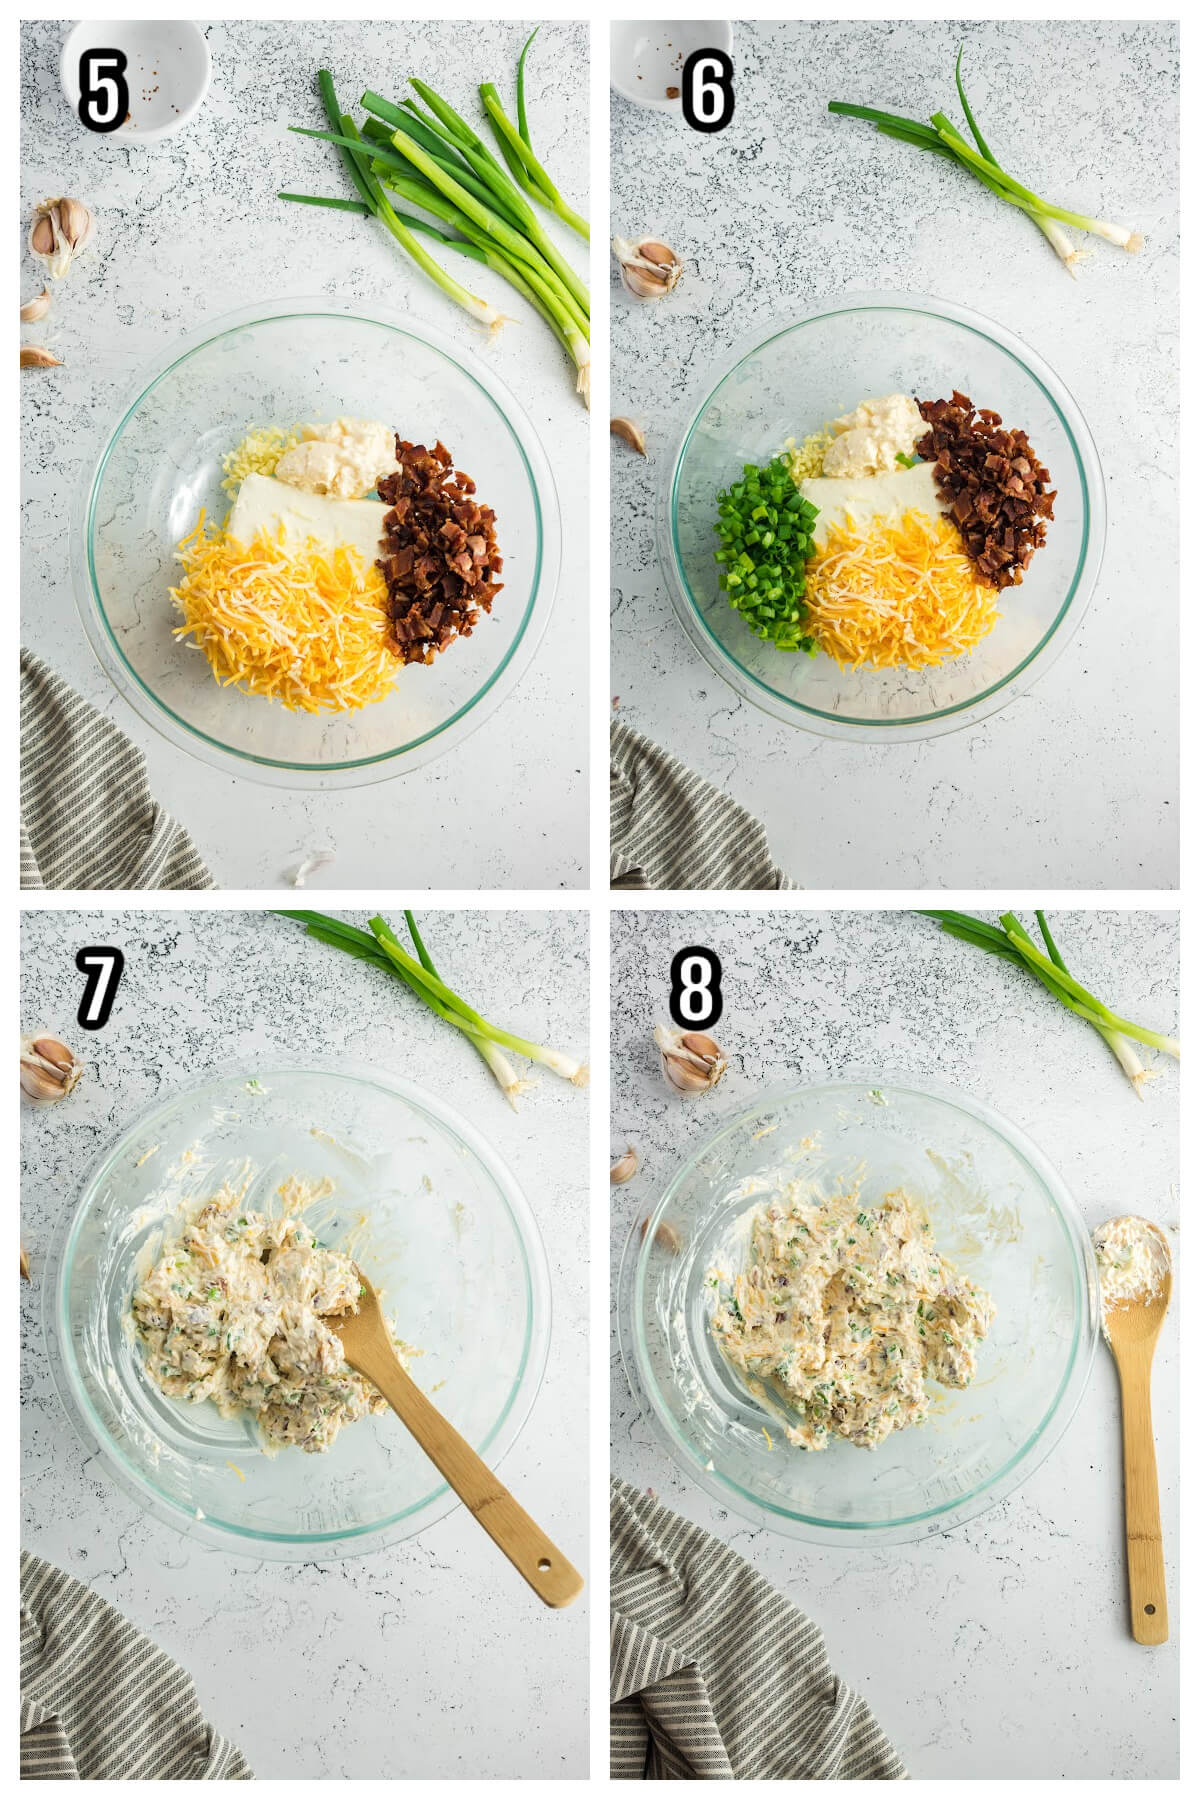 Second Set of four steps to make the Million Dollar Cream Cheese Dip with Bacon and Almonds.